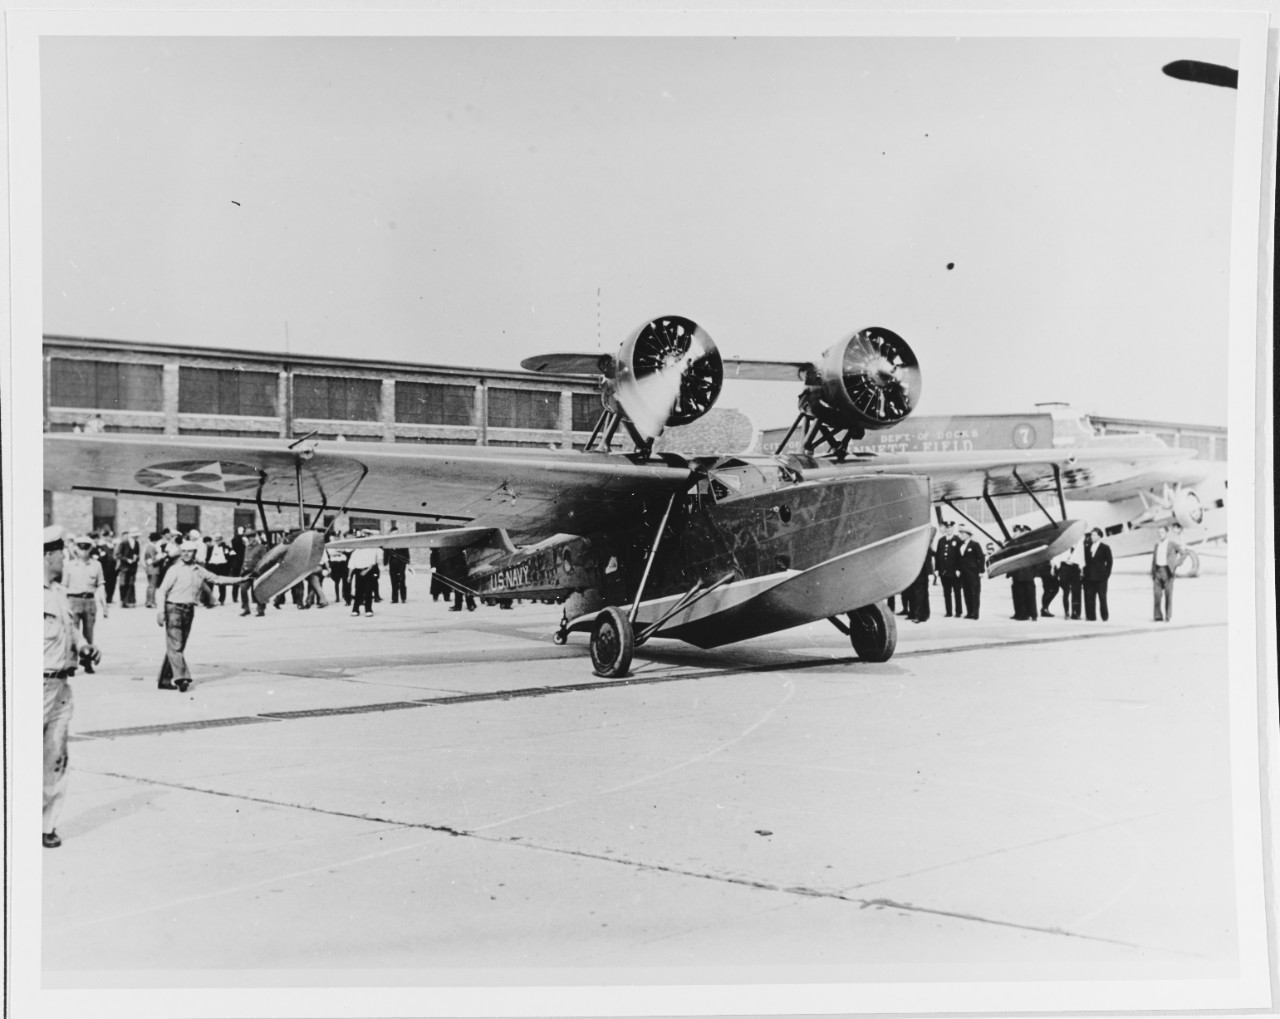 Marshall Italo Balbo, the noted Italian air man, taking off as a guest of the United States from Floyd Bennett Field, New York.